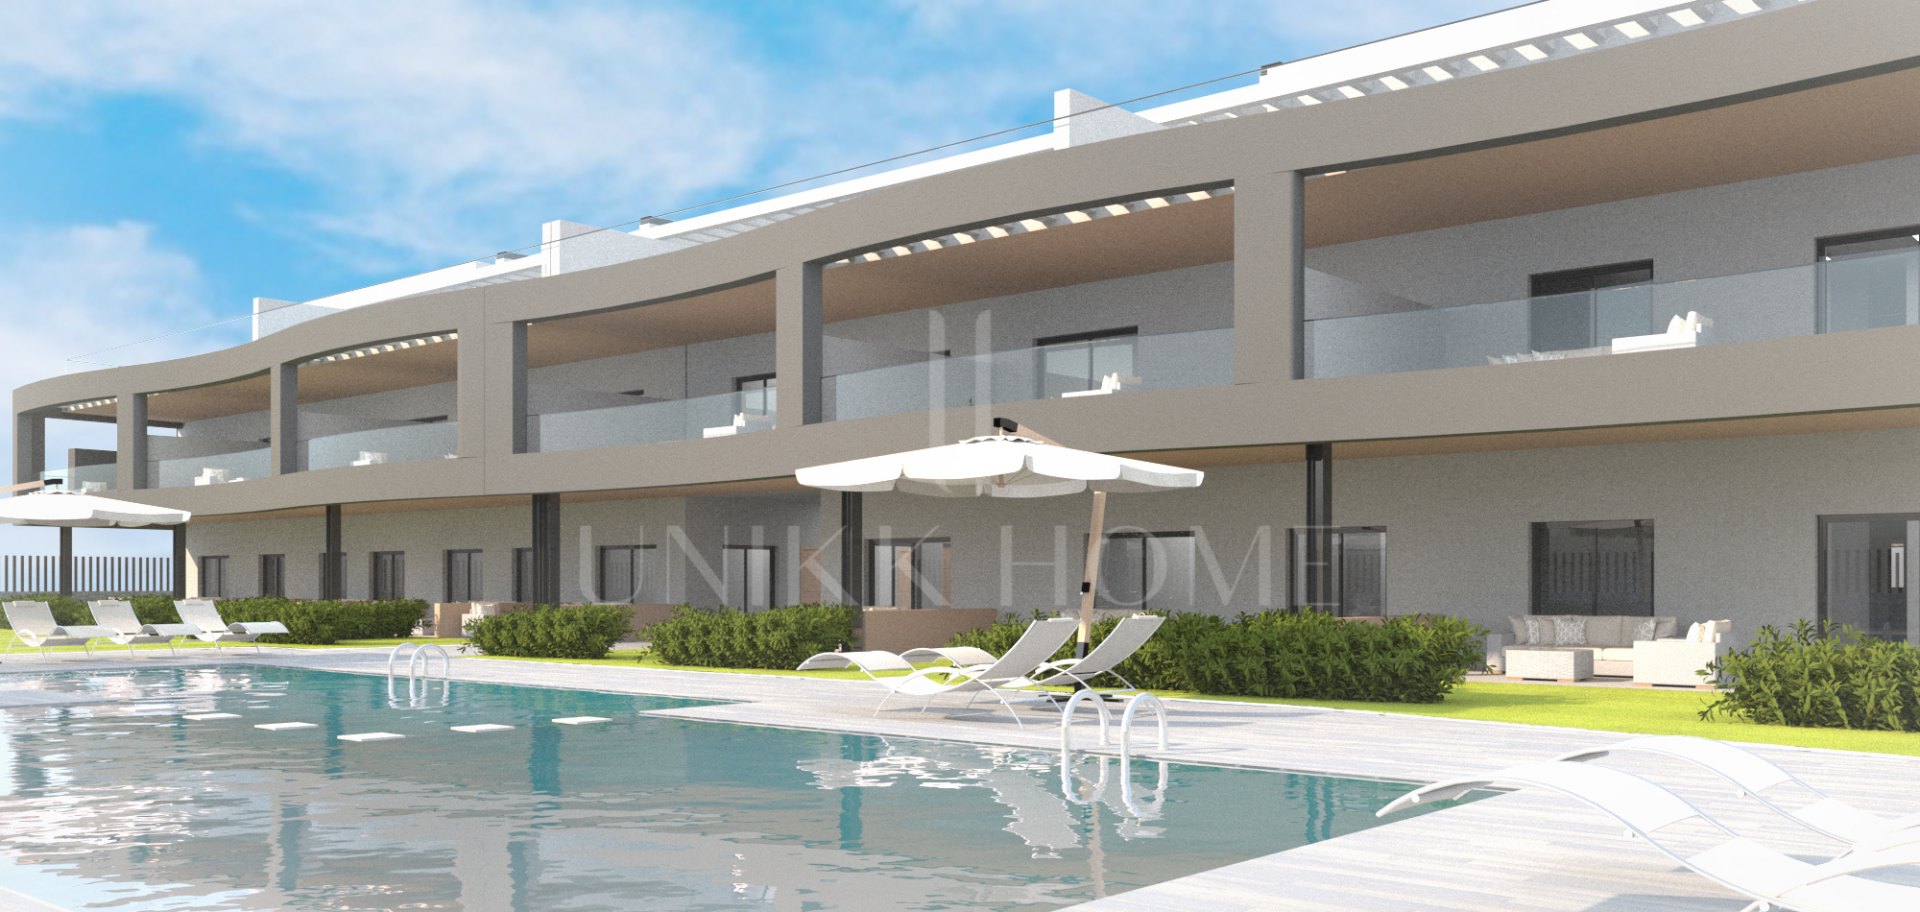 NEW GROUNDFLOOR APARTMENT WITH GARDEN WALKING DISTANCE TO THE CASARES BEACH